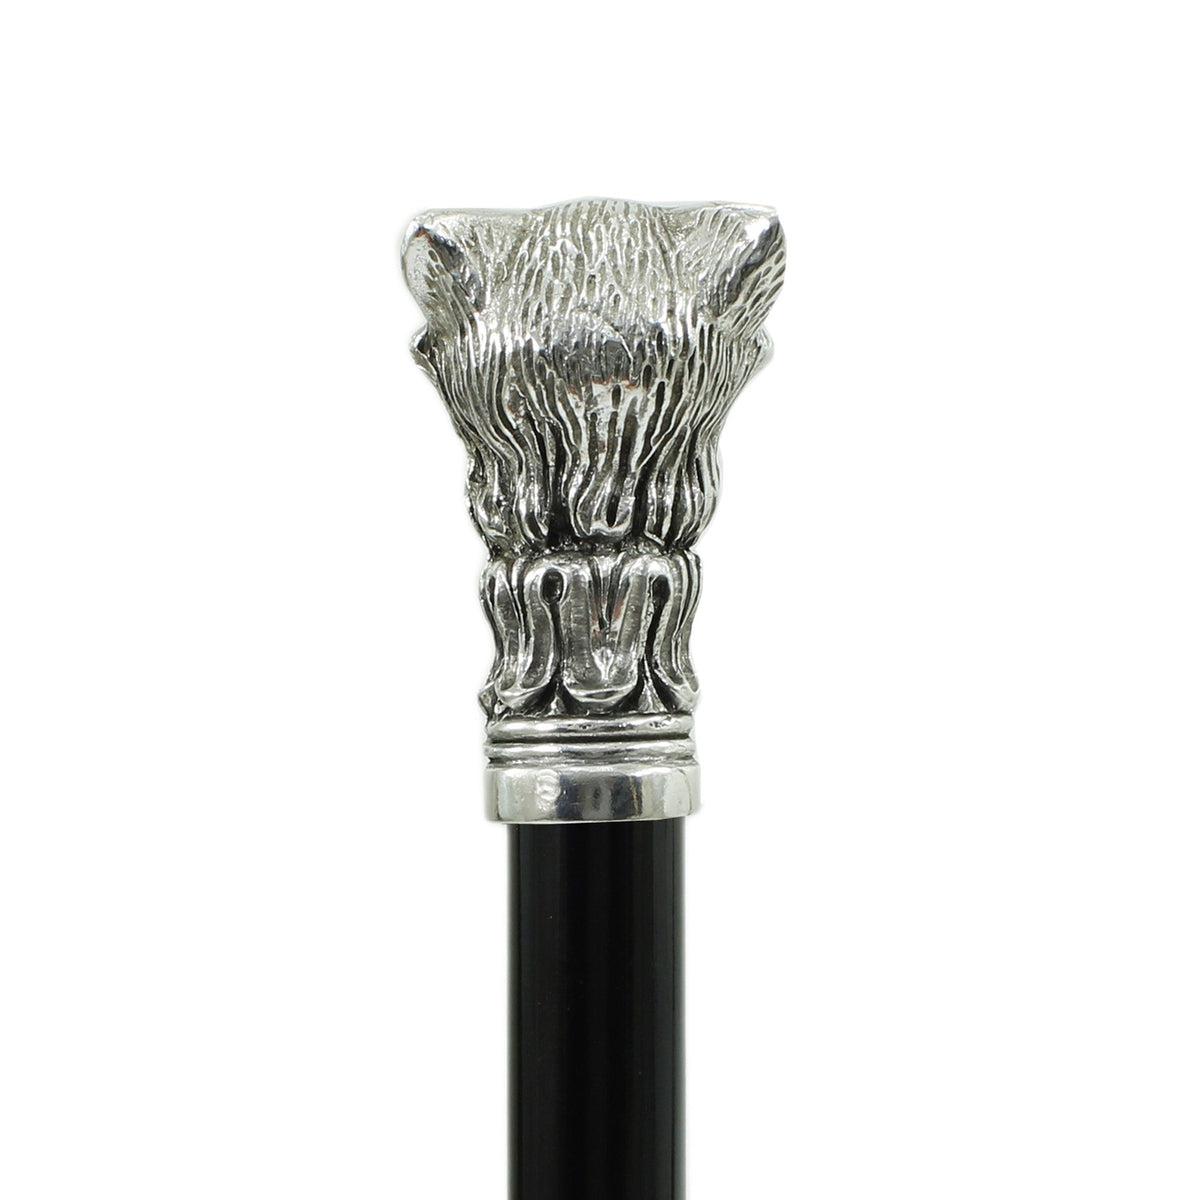 Custom Pewter Cat Cane Or Walking Stick Handmade in Italy